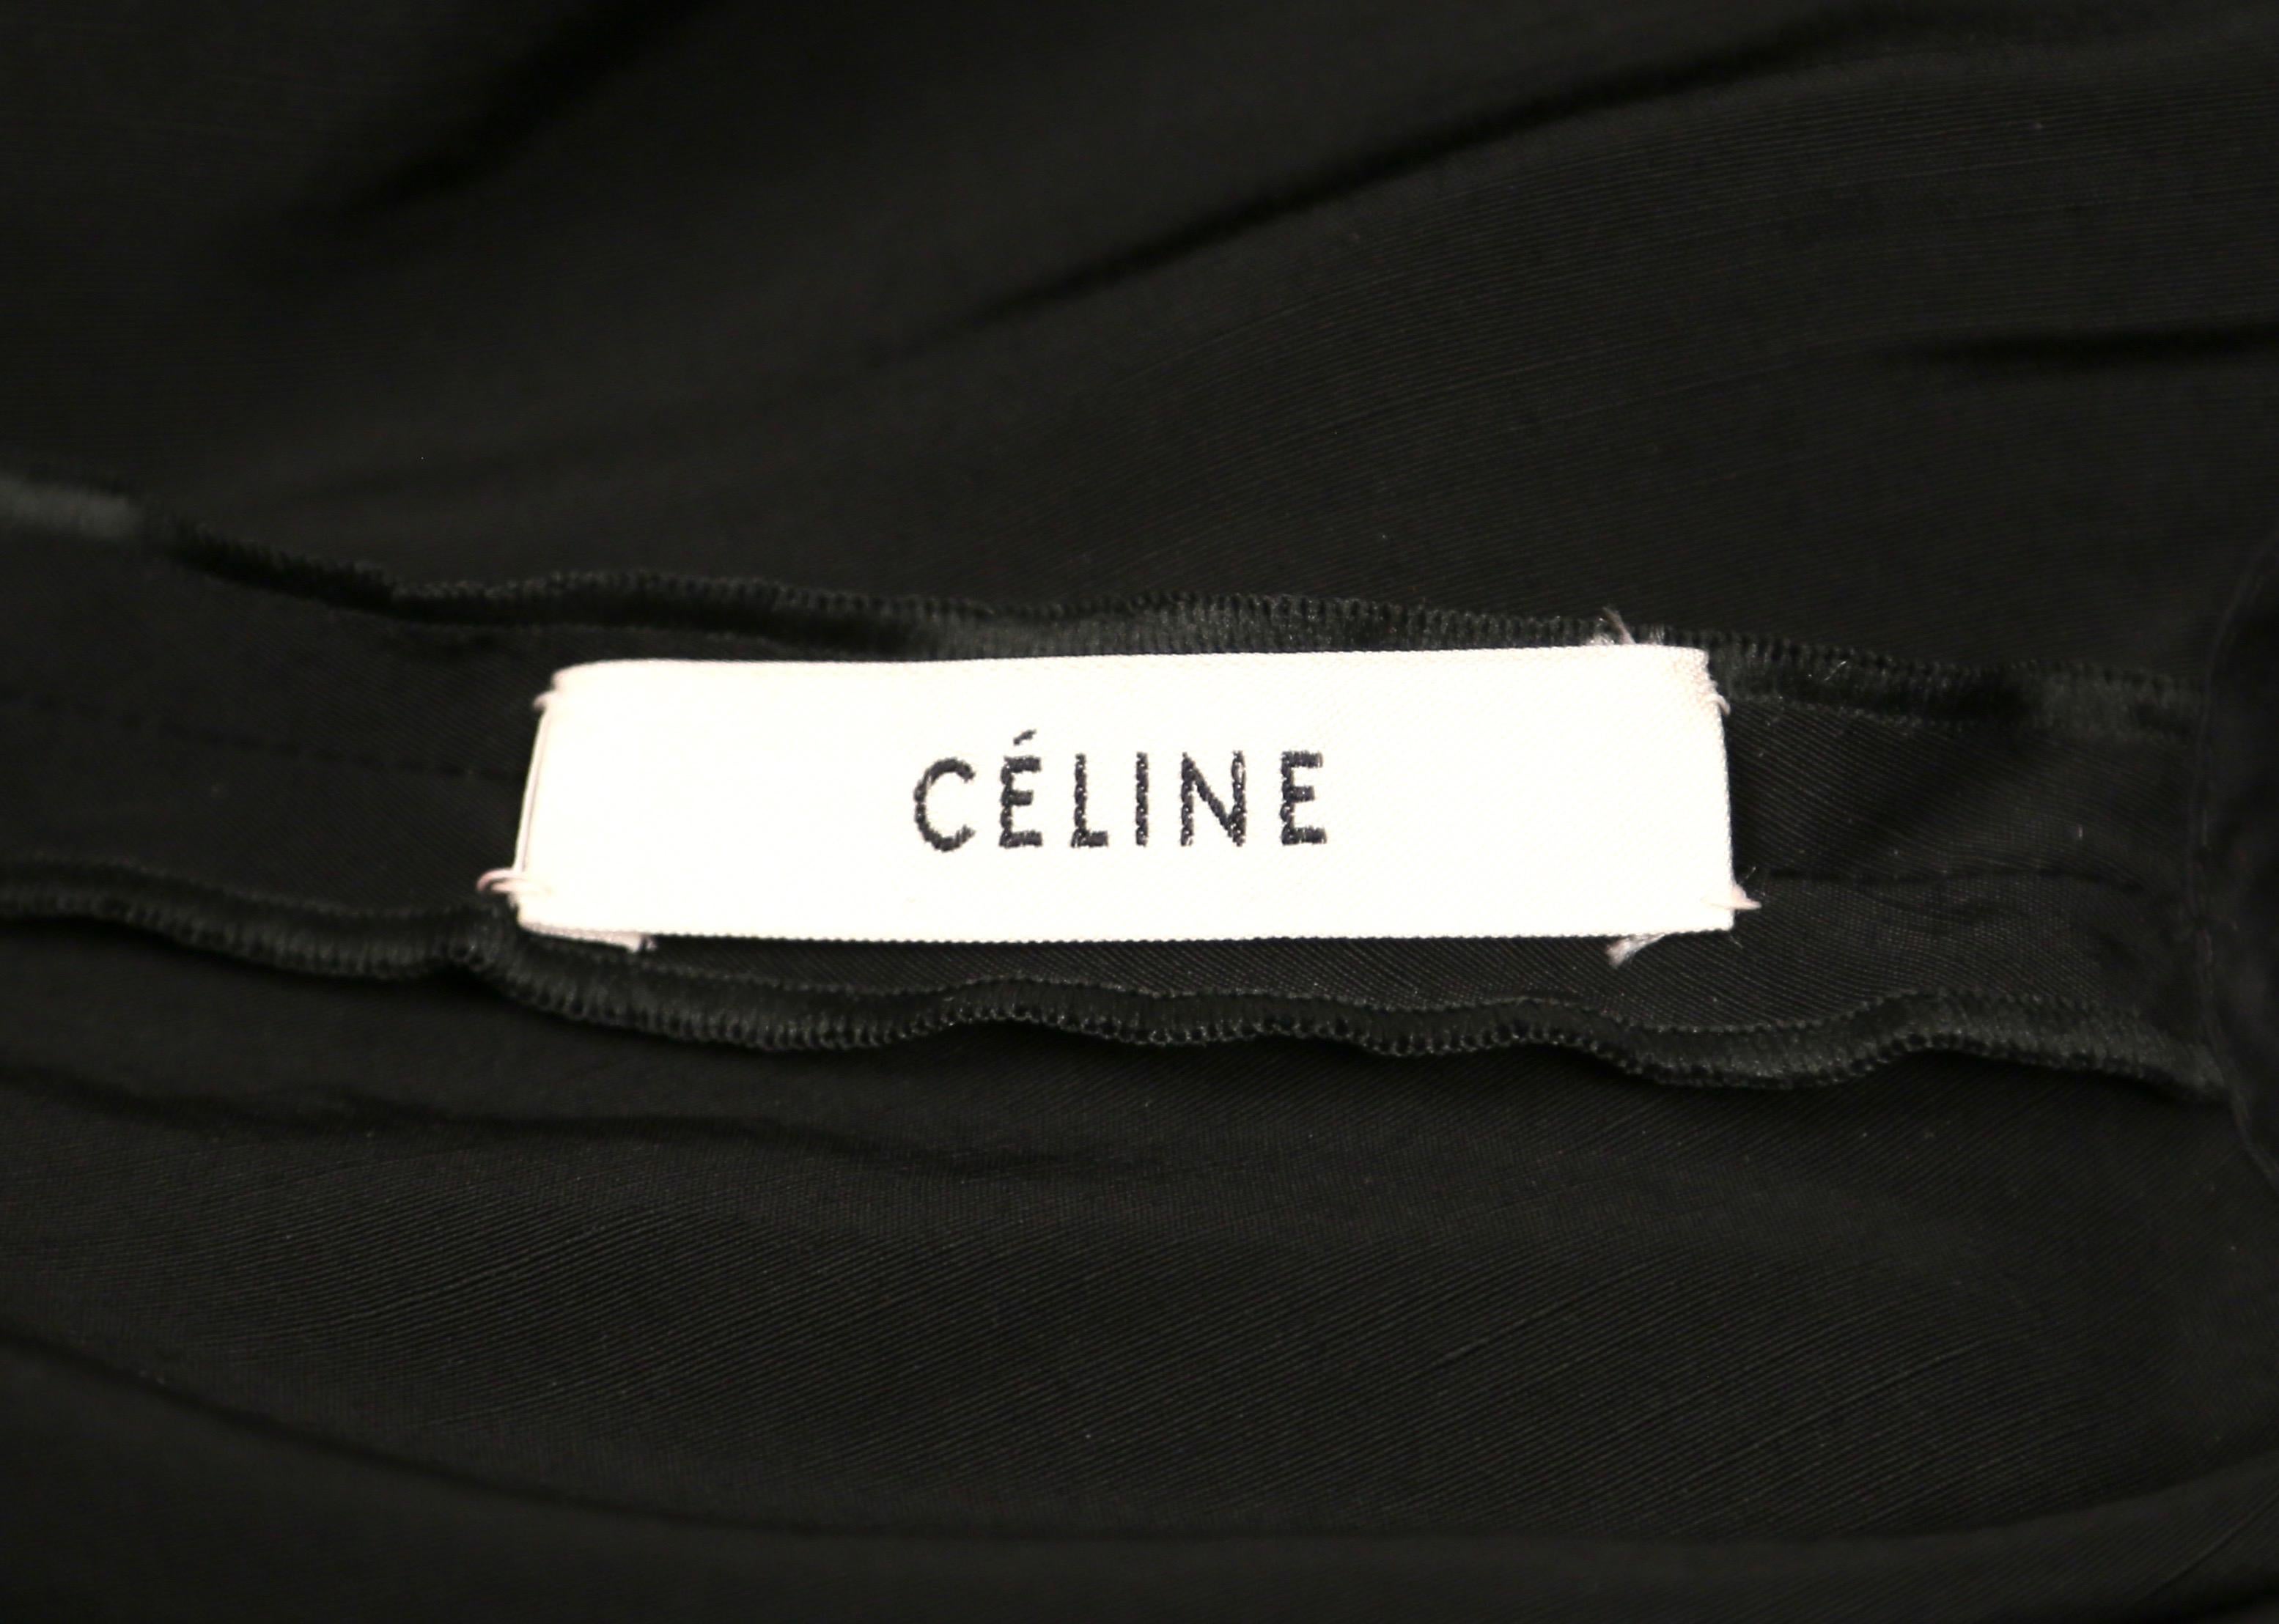 Women's or Men's Celine By Phoebe Philo black dress with ties and cut out back